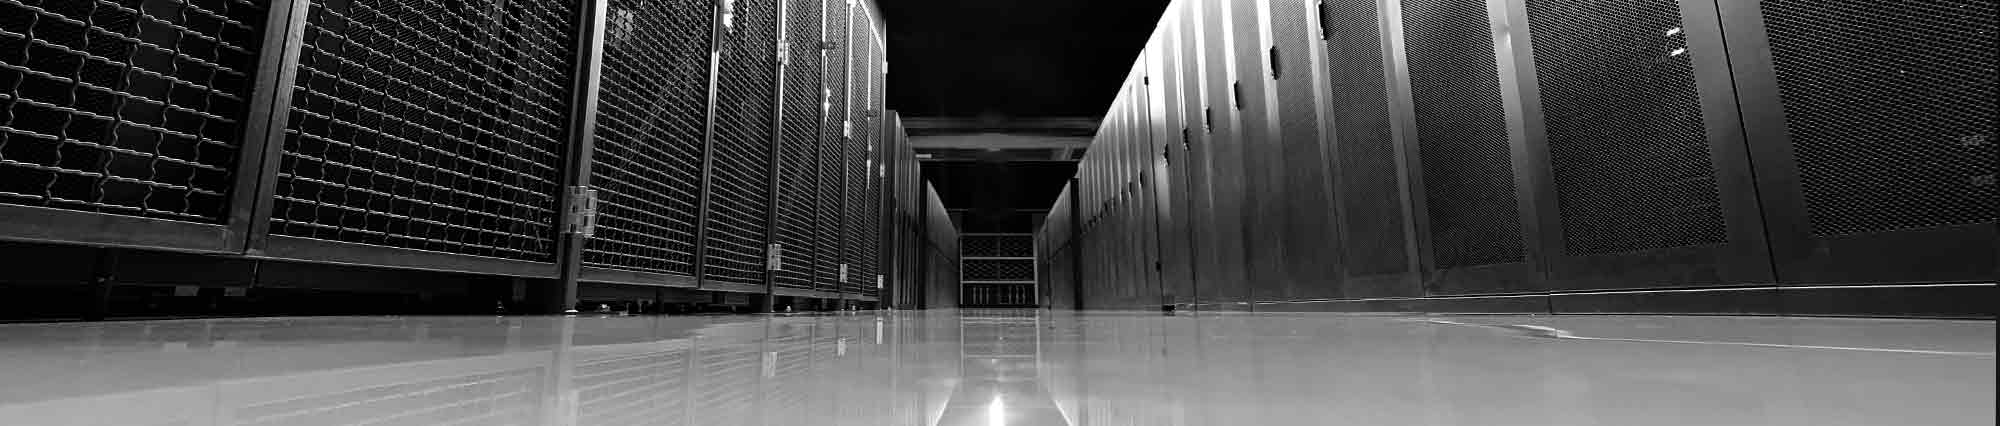 A picture of a data center where igaming can be stored